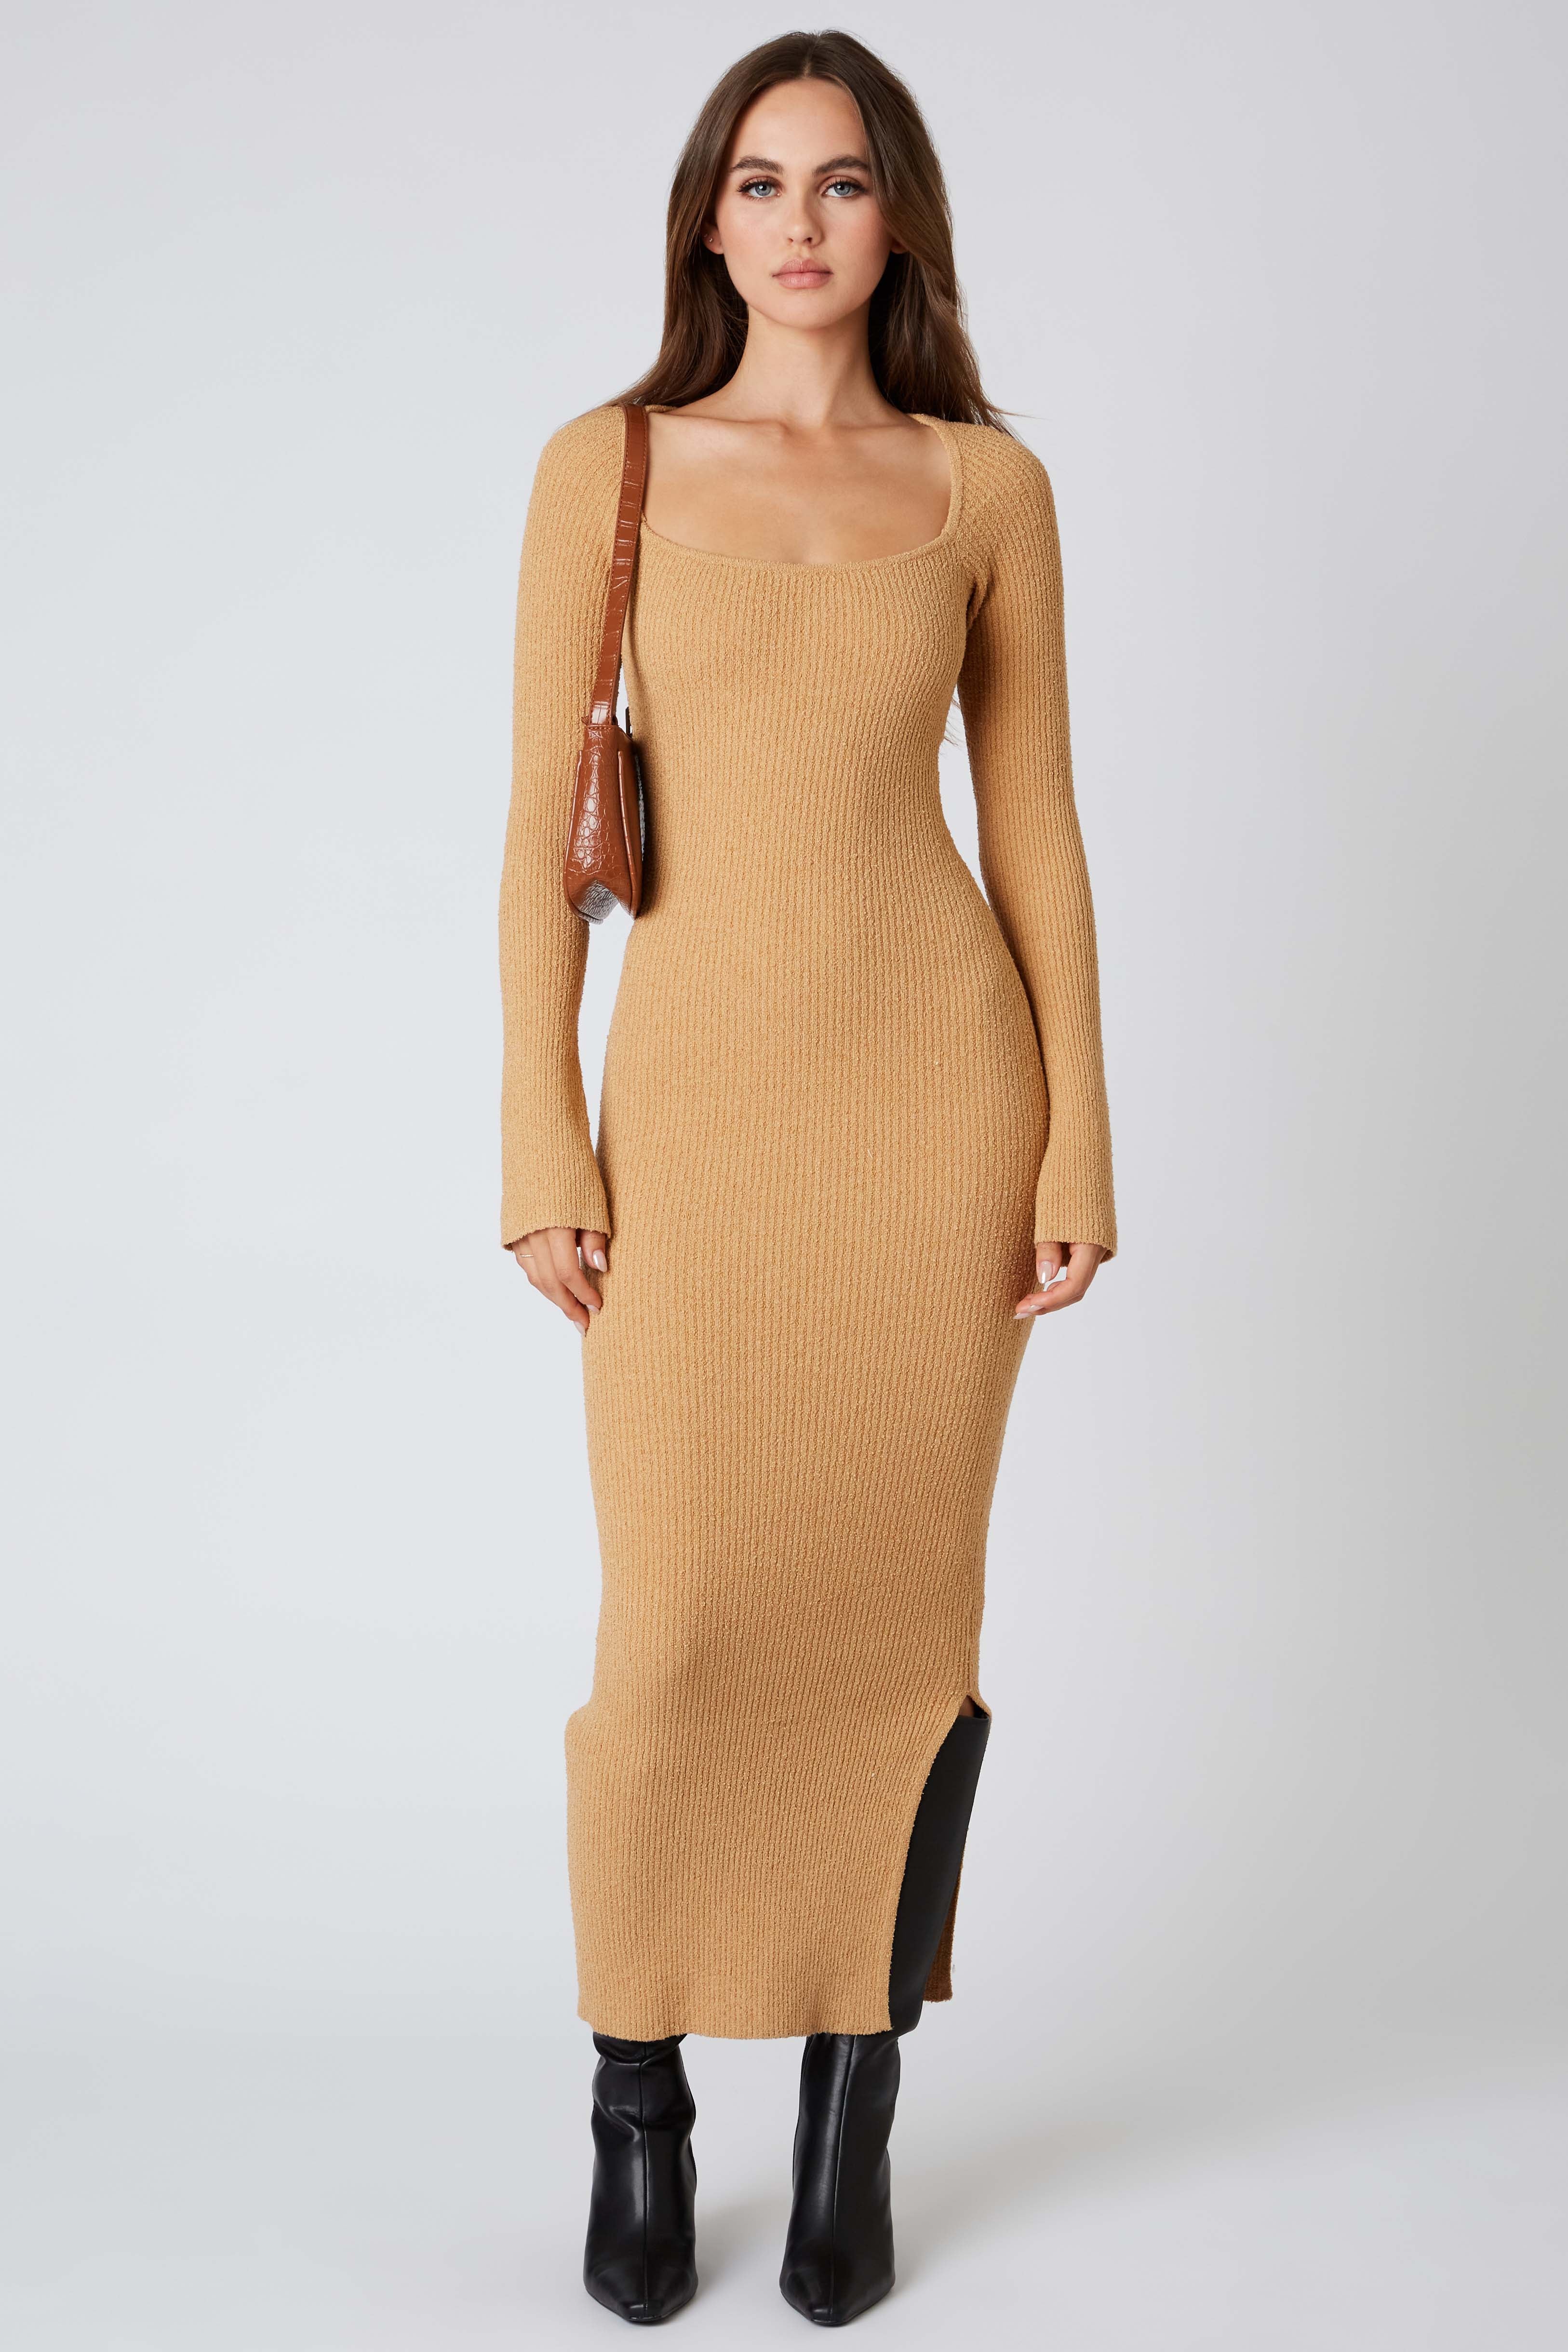 Knit Long Sleeve Maxi Dress in Tan Front View